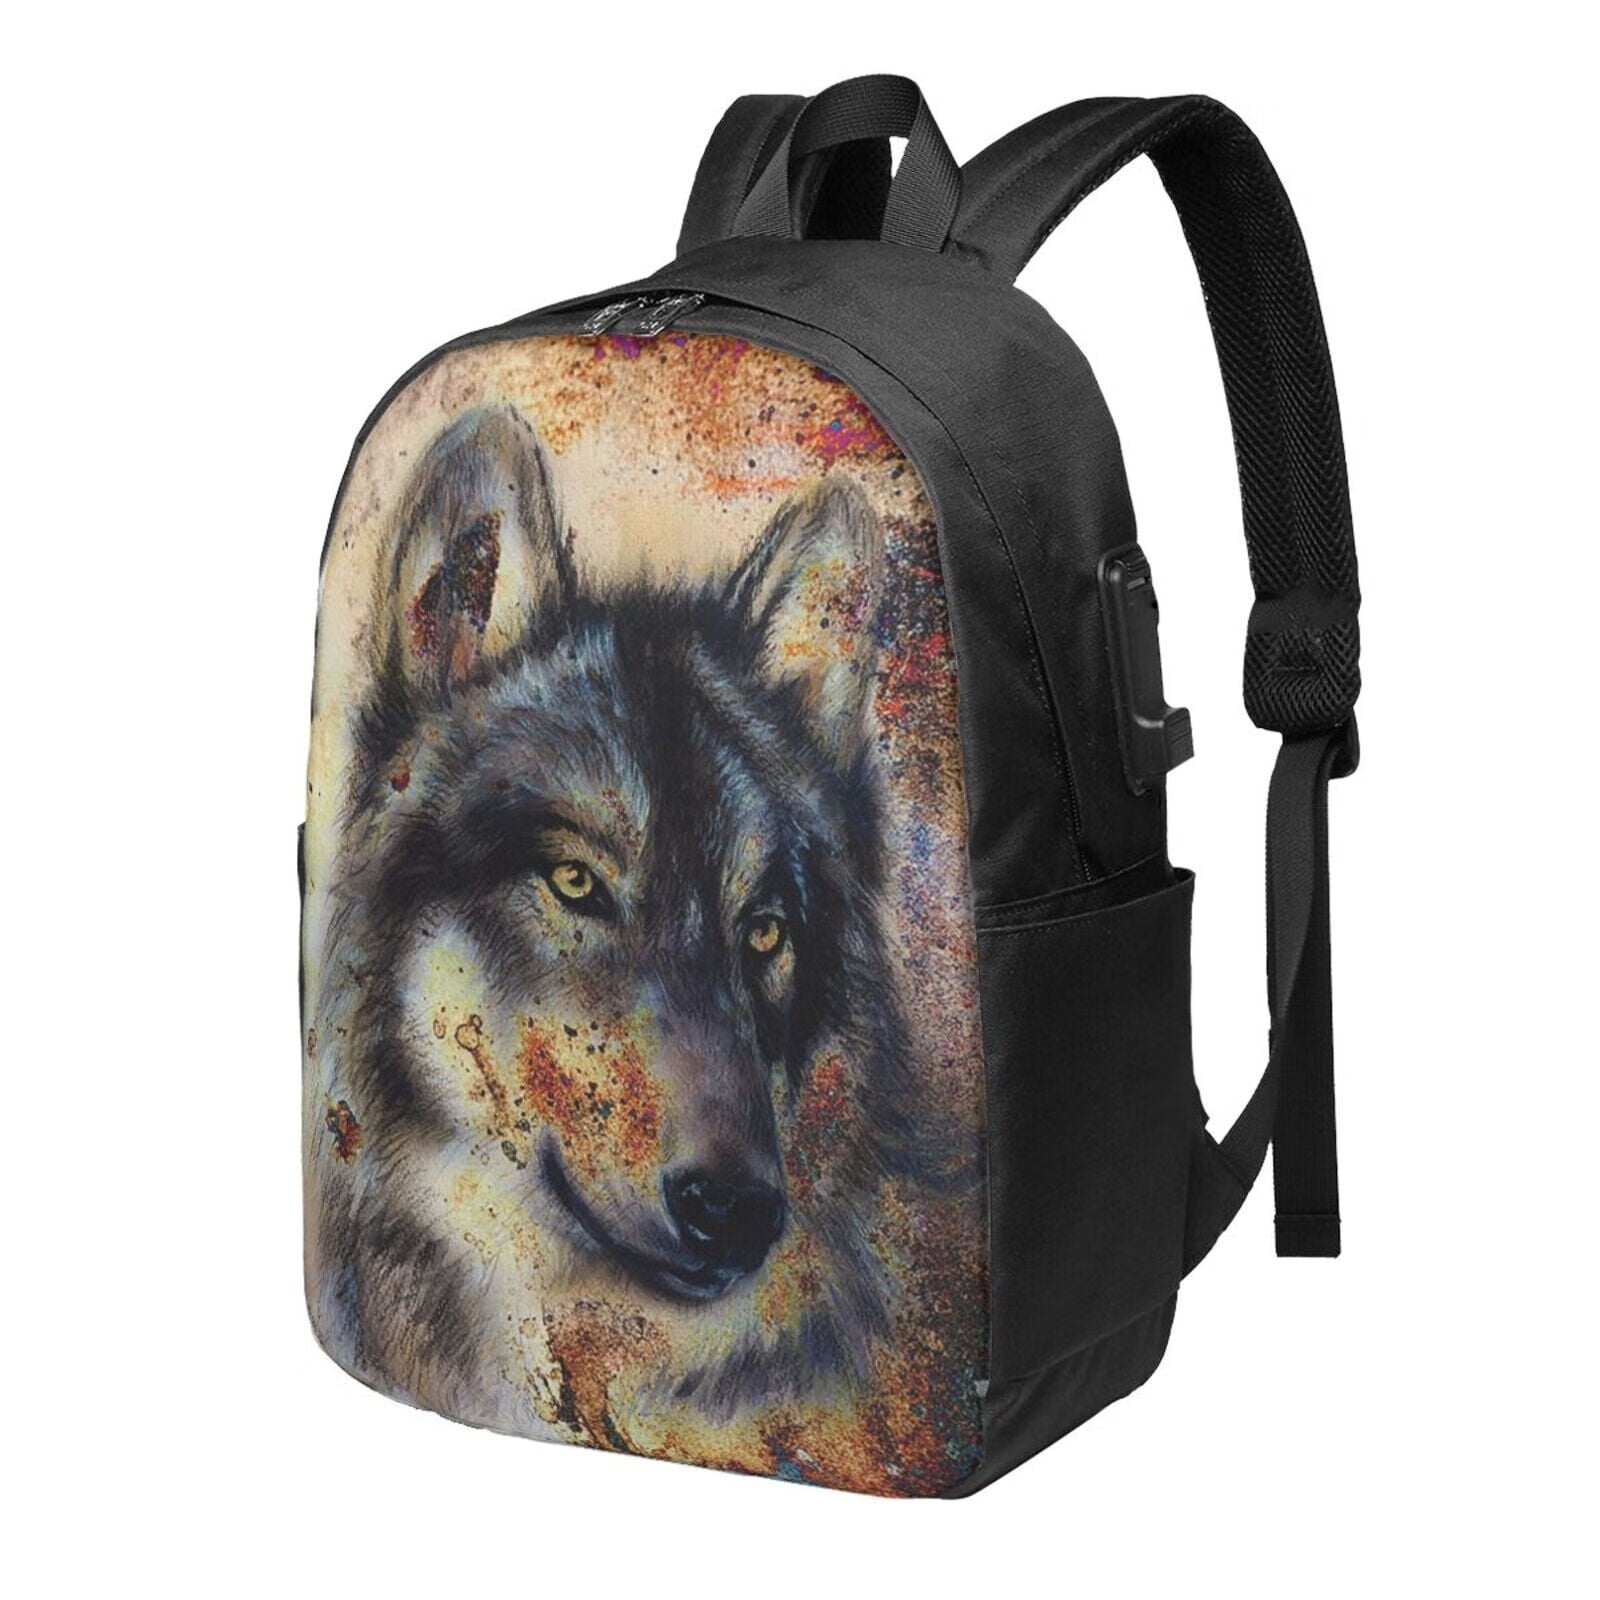 vermomming auteur angst Travel Laptop Backpack, Wolf 3D Print Casual bag with USB Charging Port,  College School Bookbag Backpack 17" teenager aldult - Walmart.com